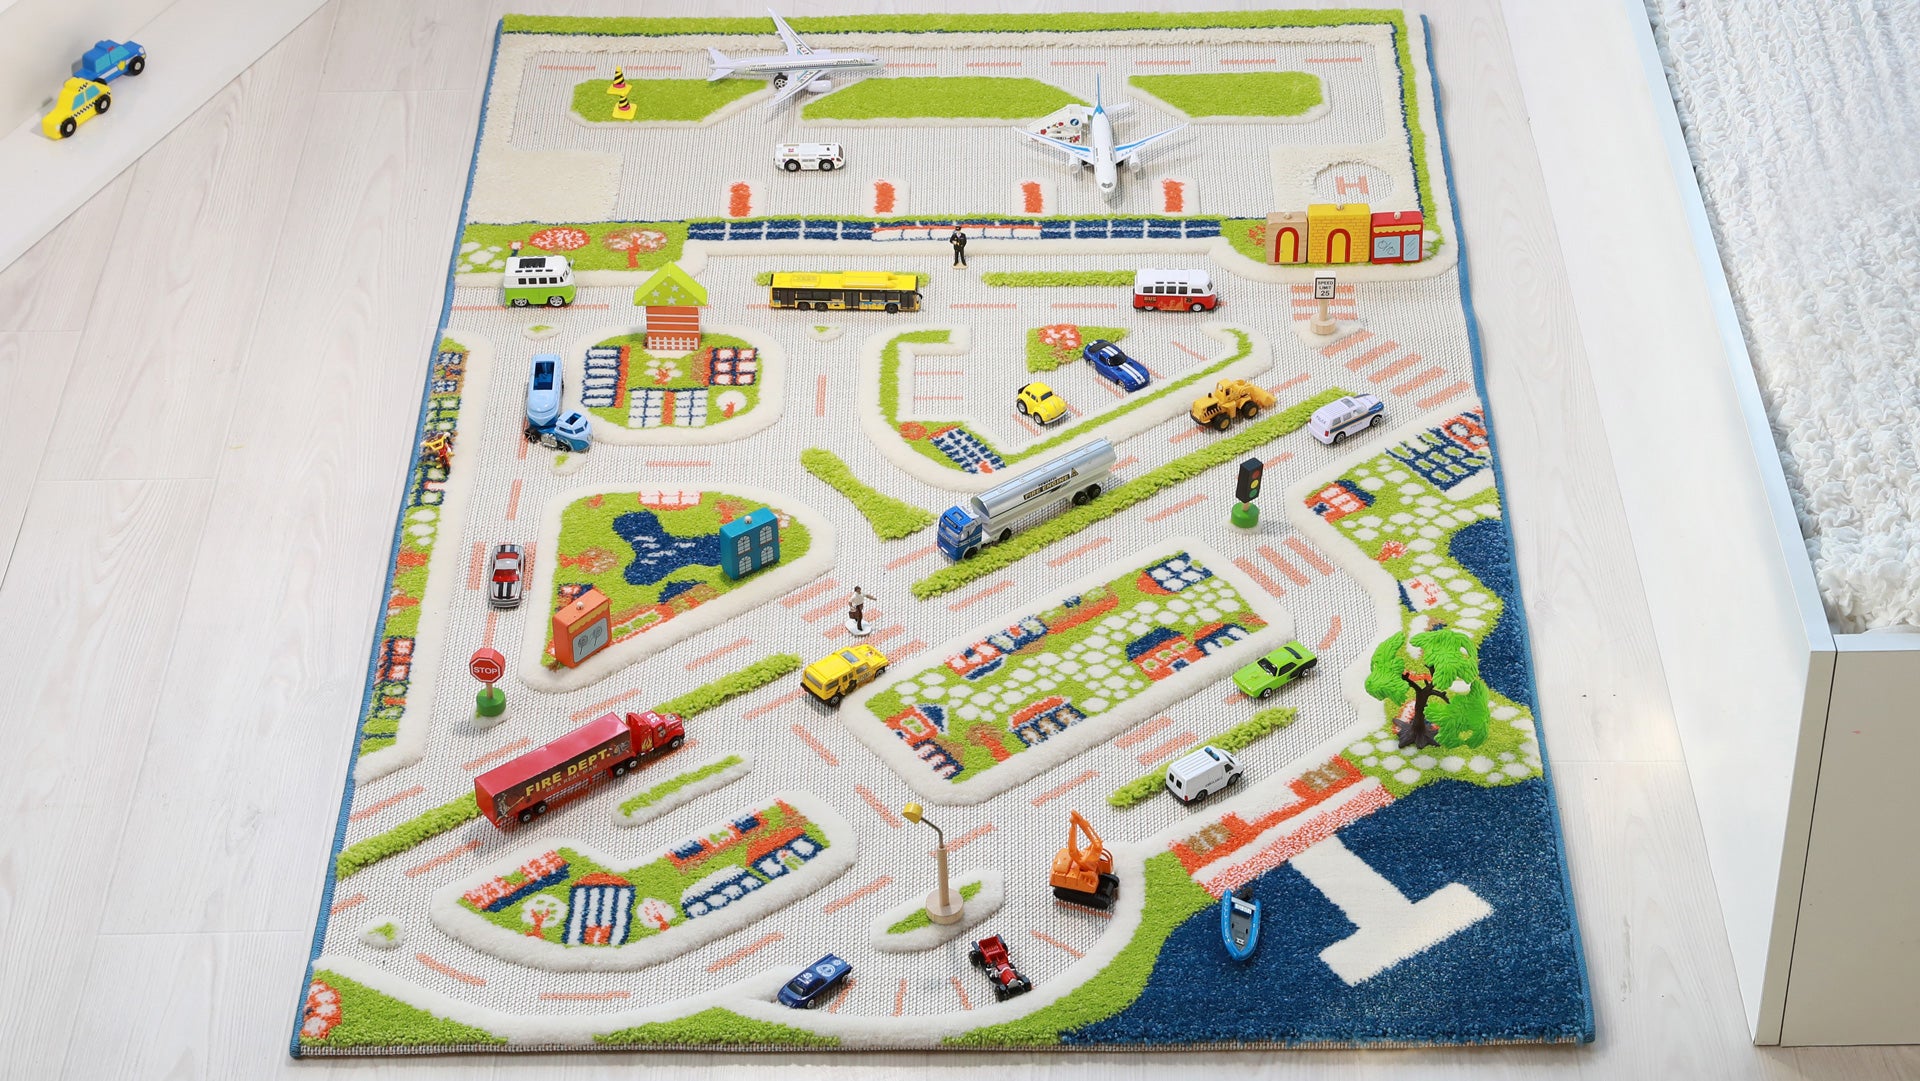 3-D, Textured Car Carpet and Play Rug for Kids - 39 x 59 in